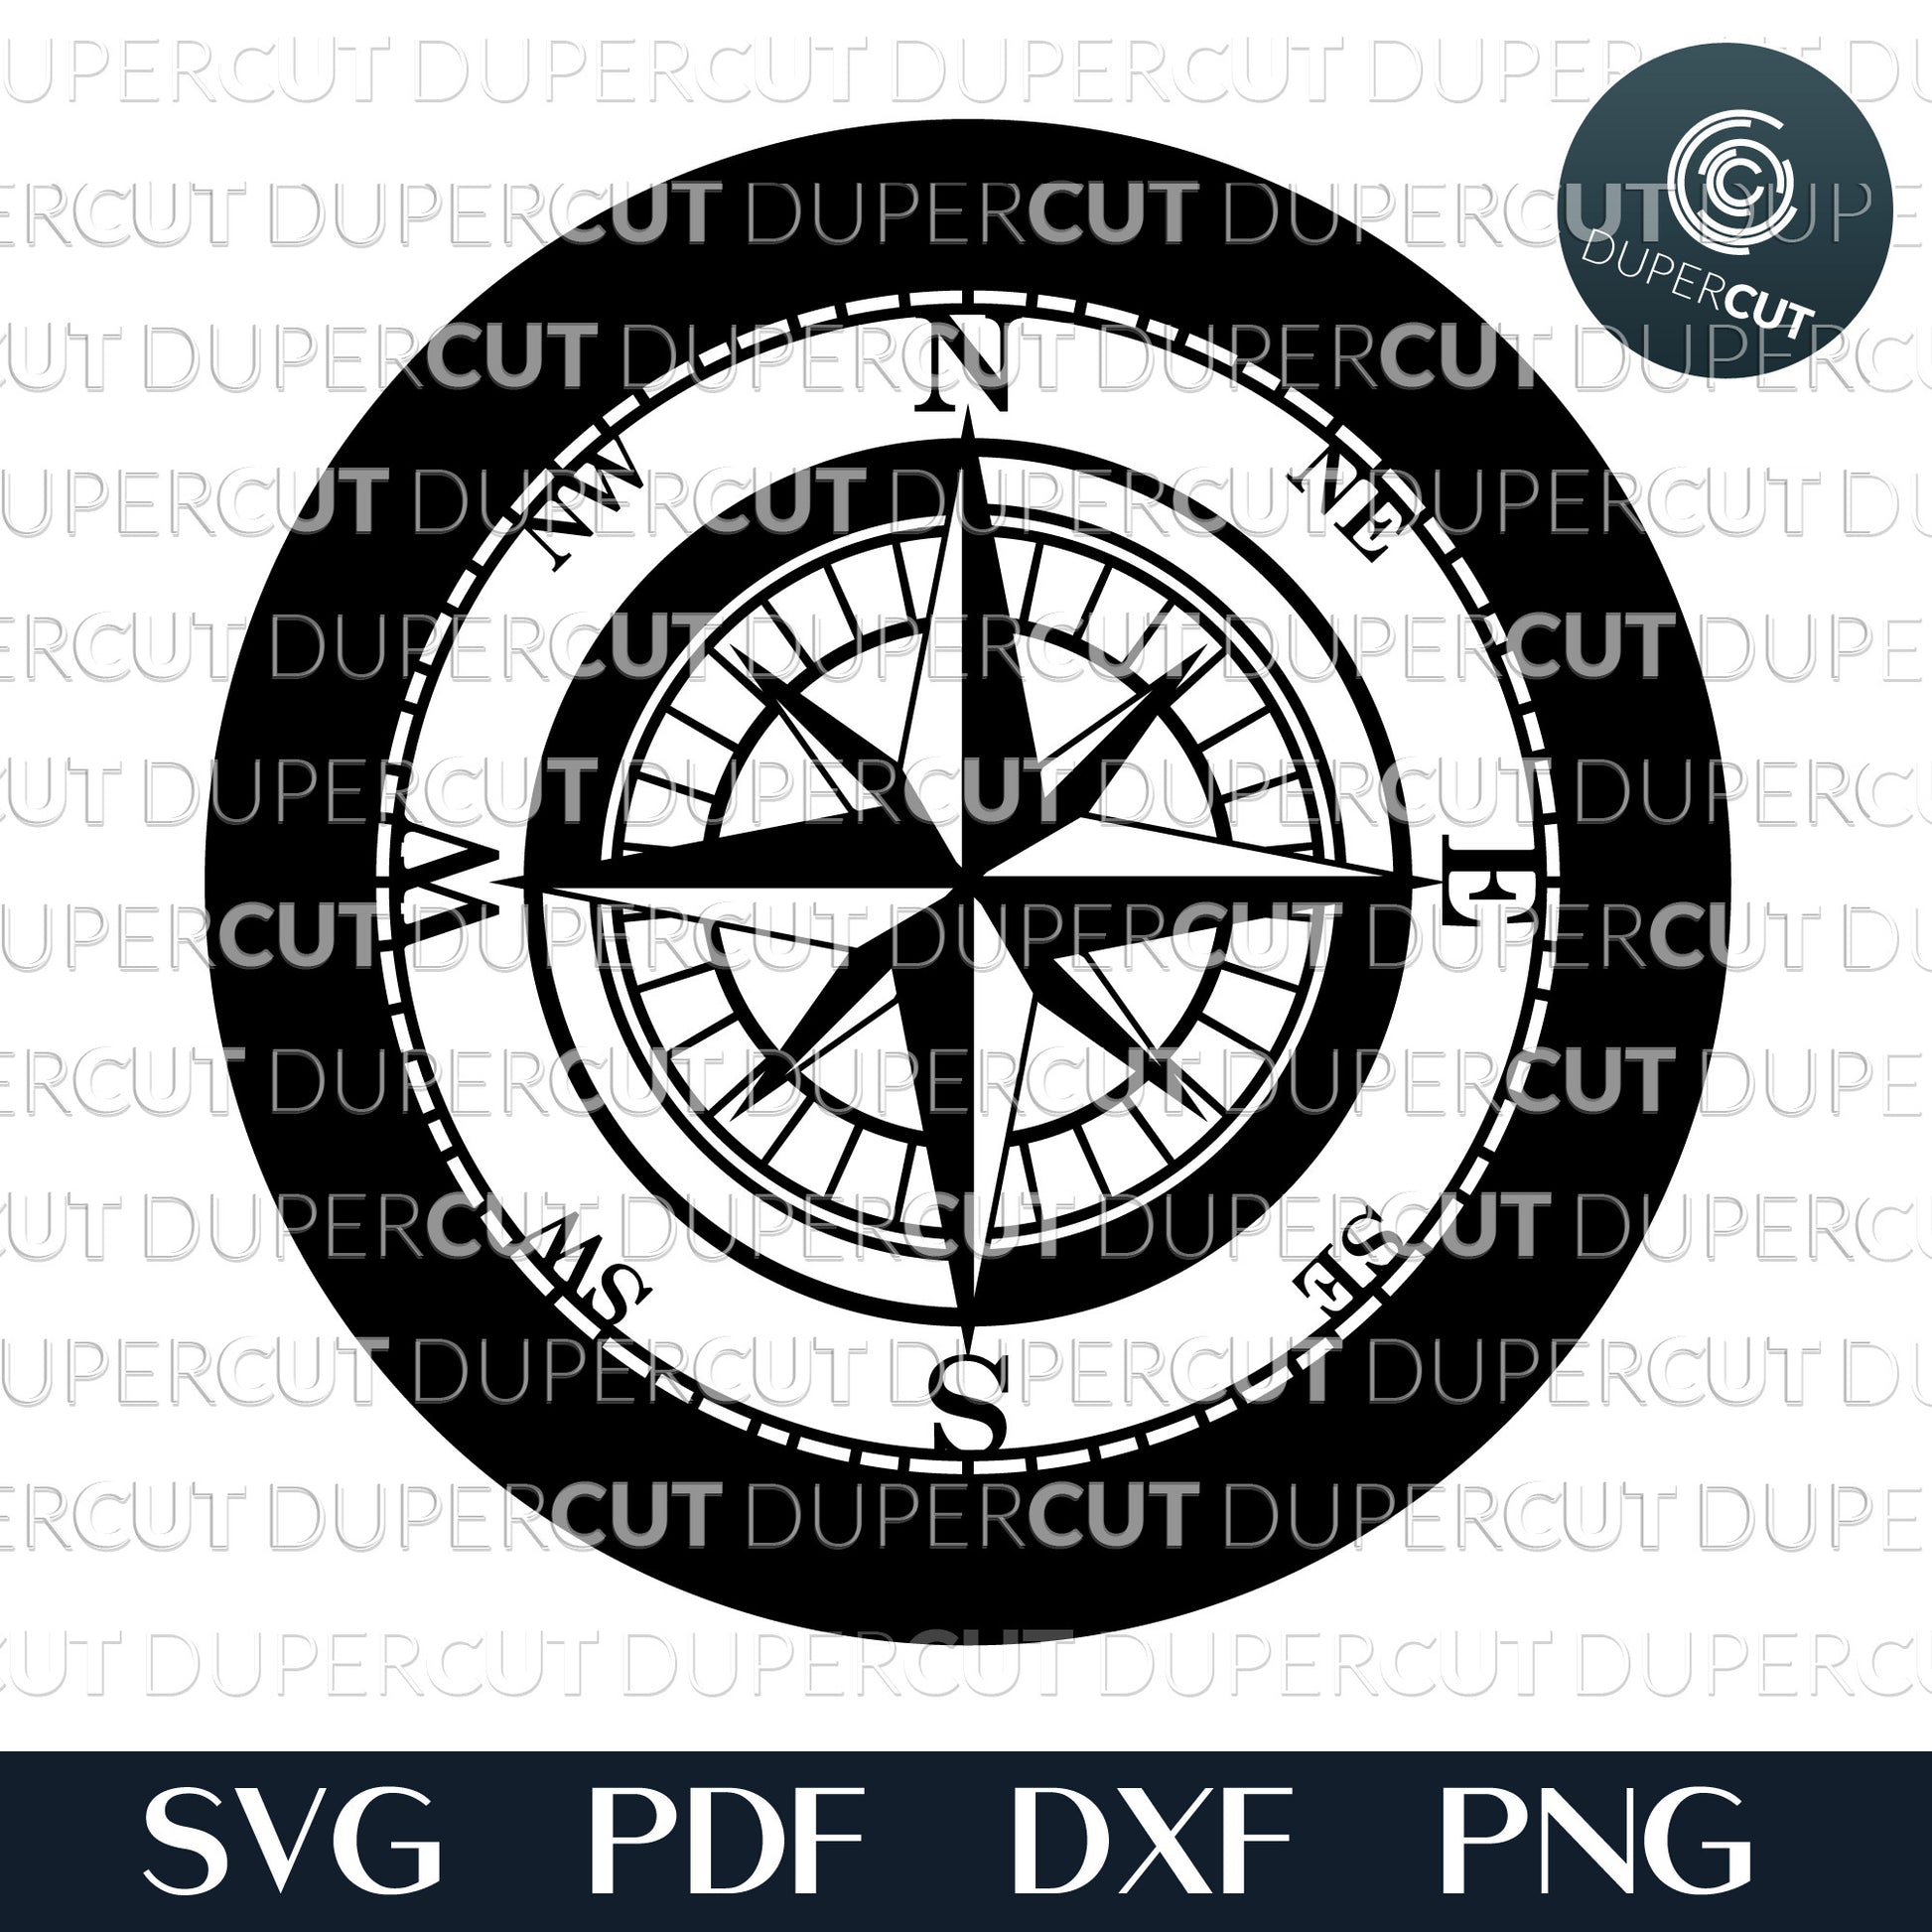 Compass silhouette, SVG PNG DXF files for cutting, laser engraving, scrapbooking. For use with Cricut, Glowforge, Silhouette, CNC machines.